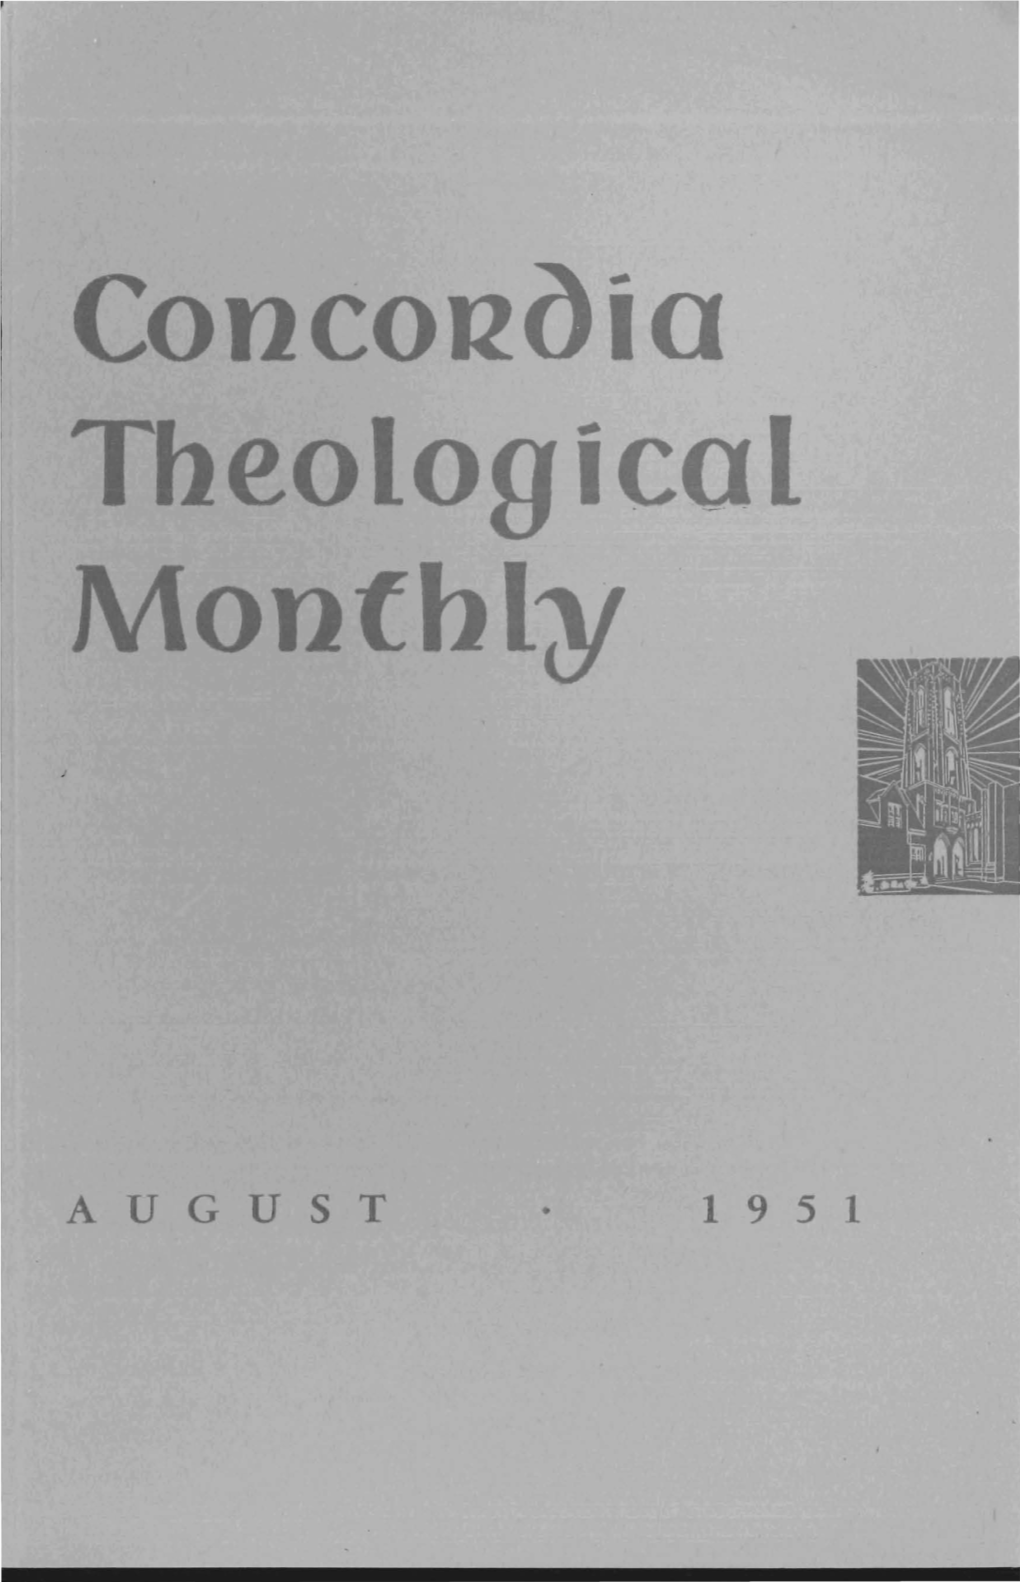 Tbeological Monthly